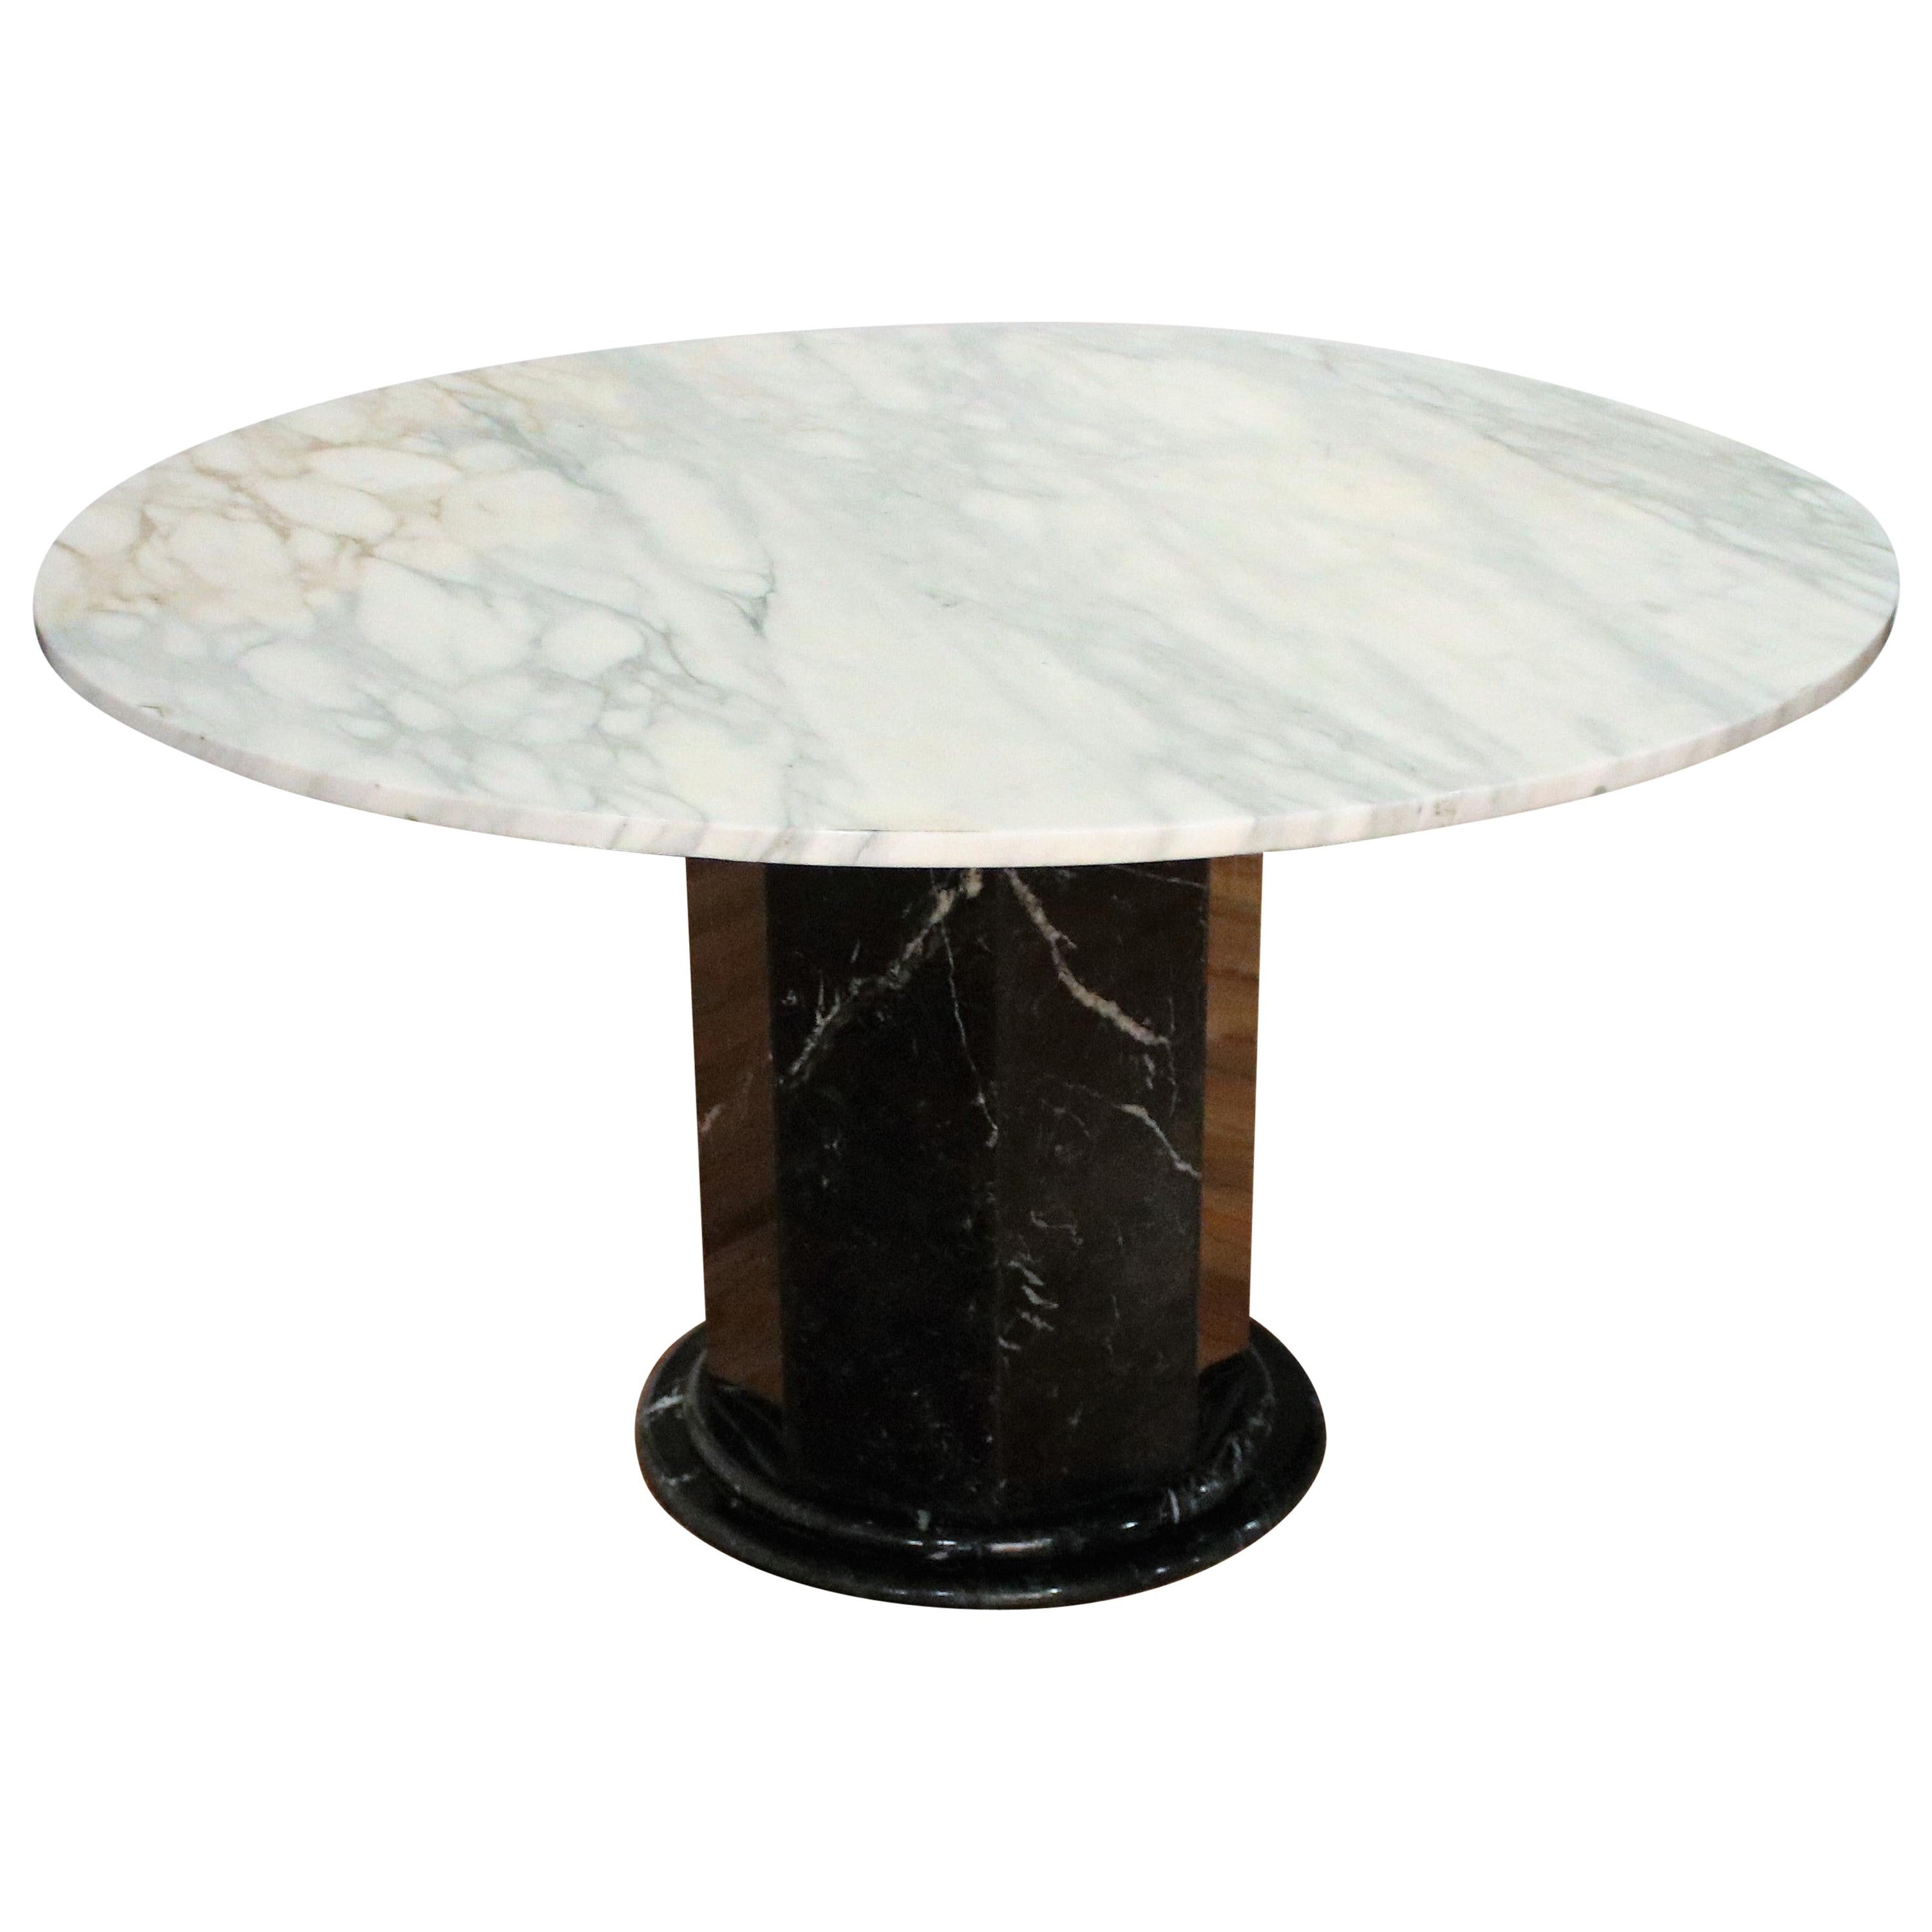 Italian Black and White Marble Pedestal Table, 1970s For Sale